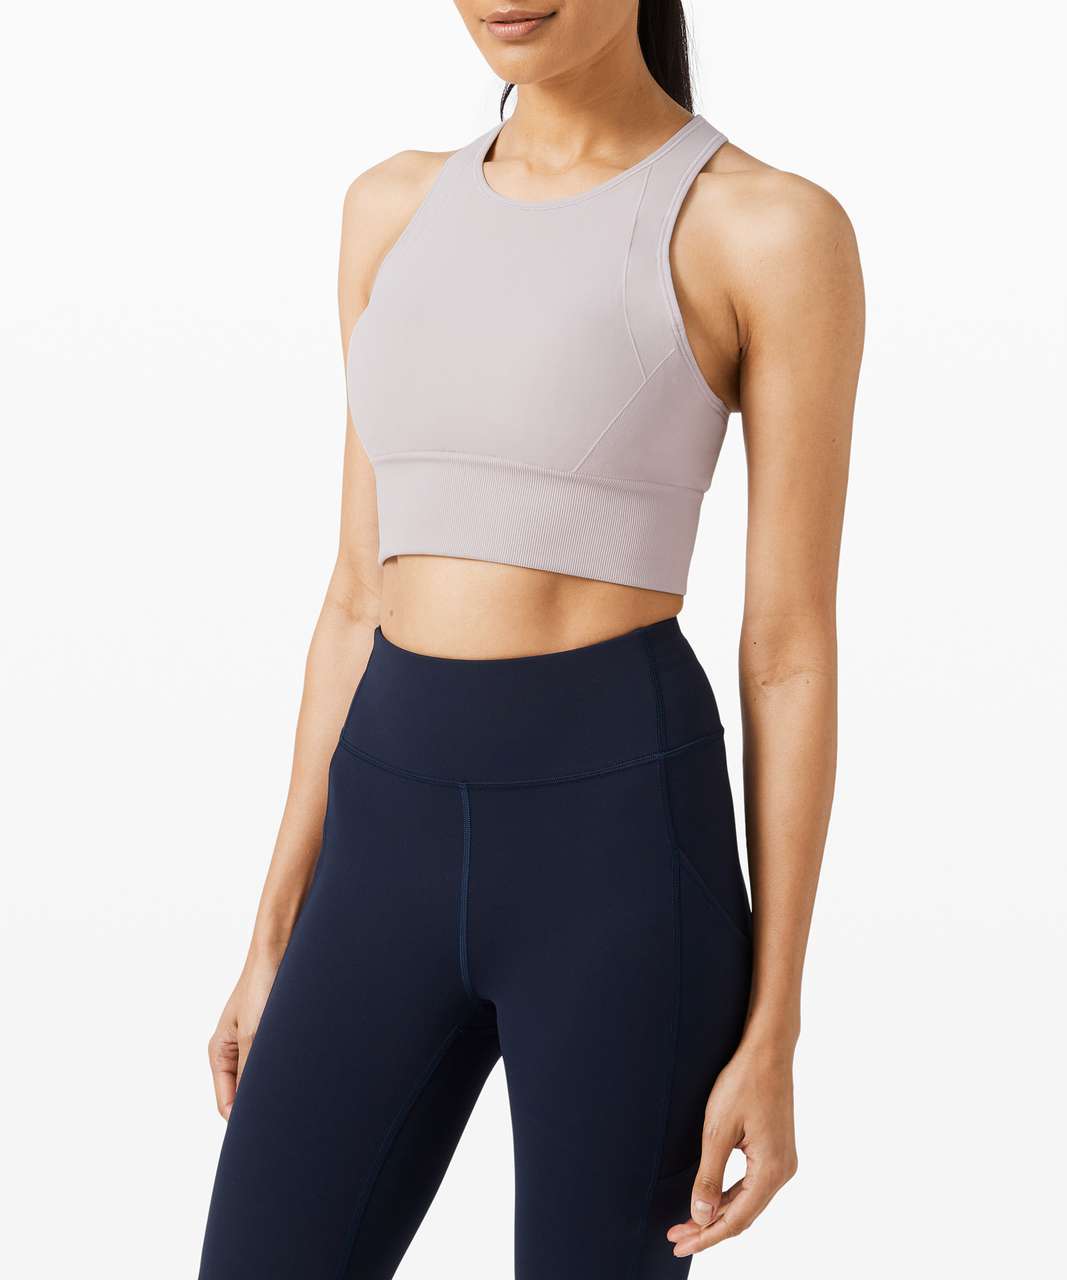 Lumpy Ebb to Train Bra (Size 10) - Anyone else have this issue? : r/ lululemon